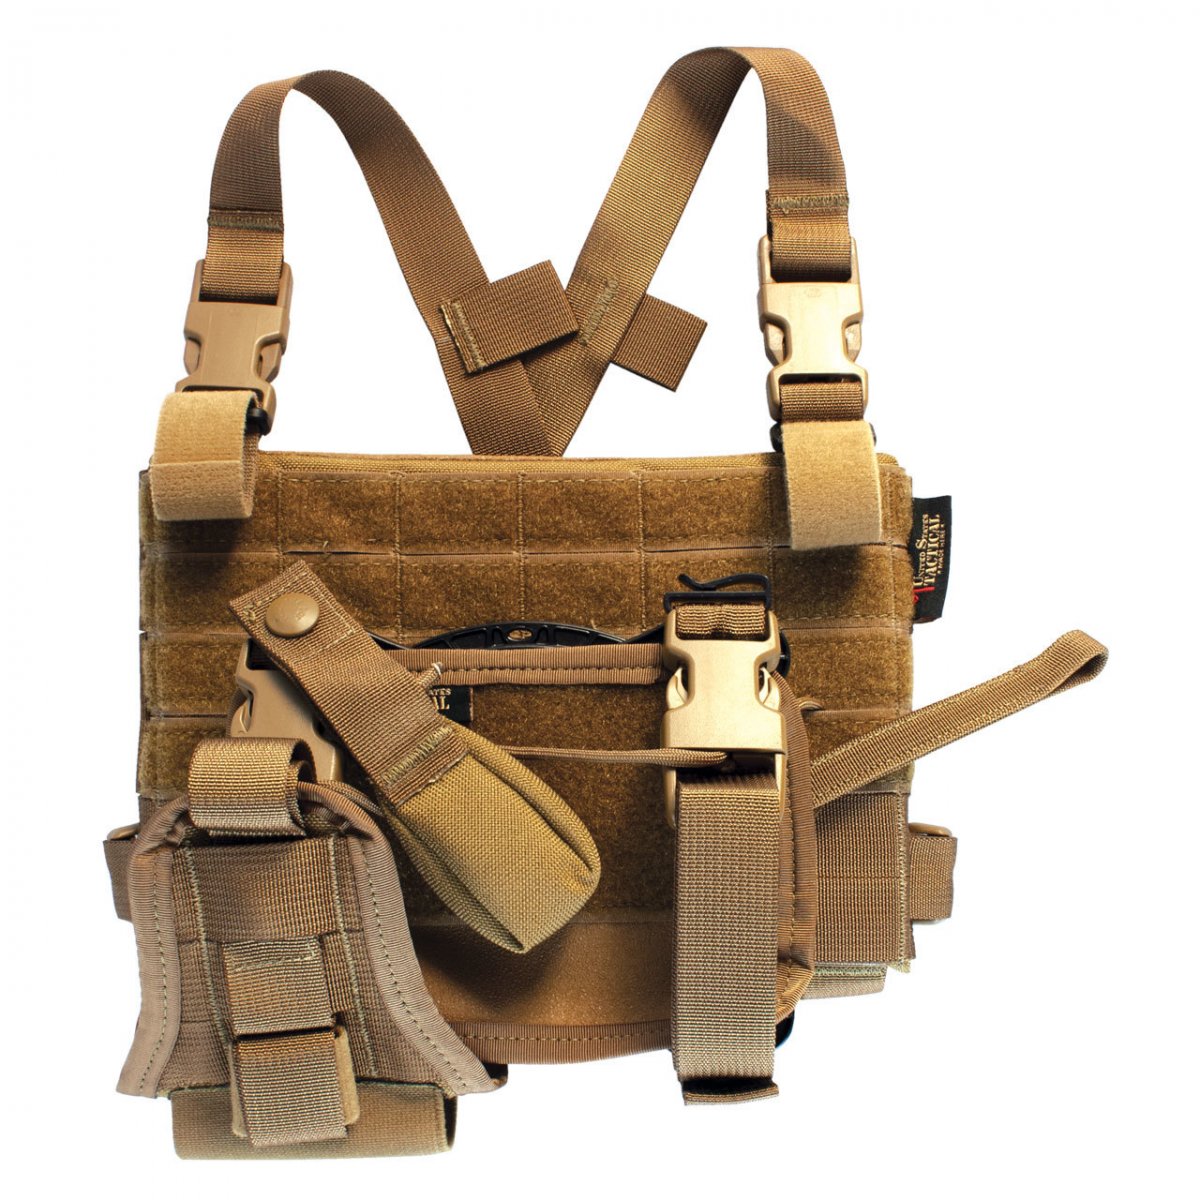 LBE Harness with Elite Retention System | MilitaryZone